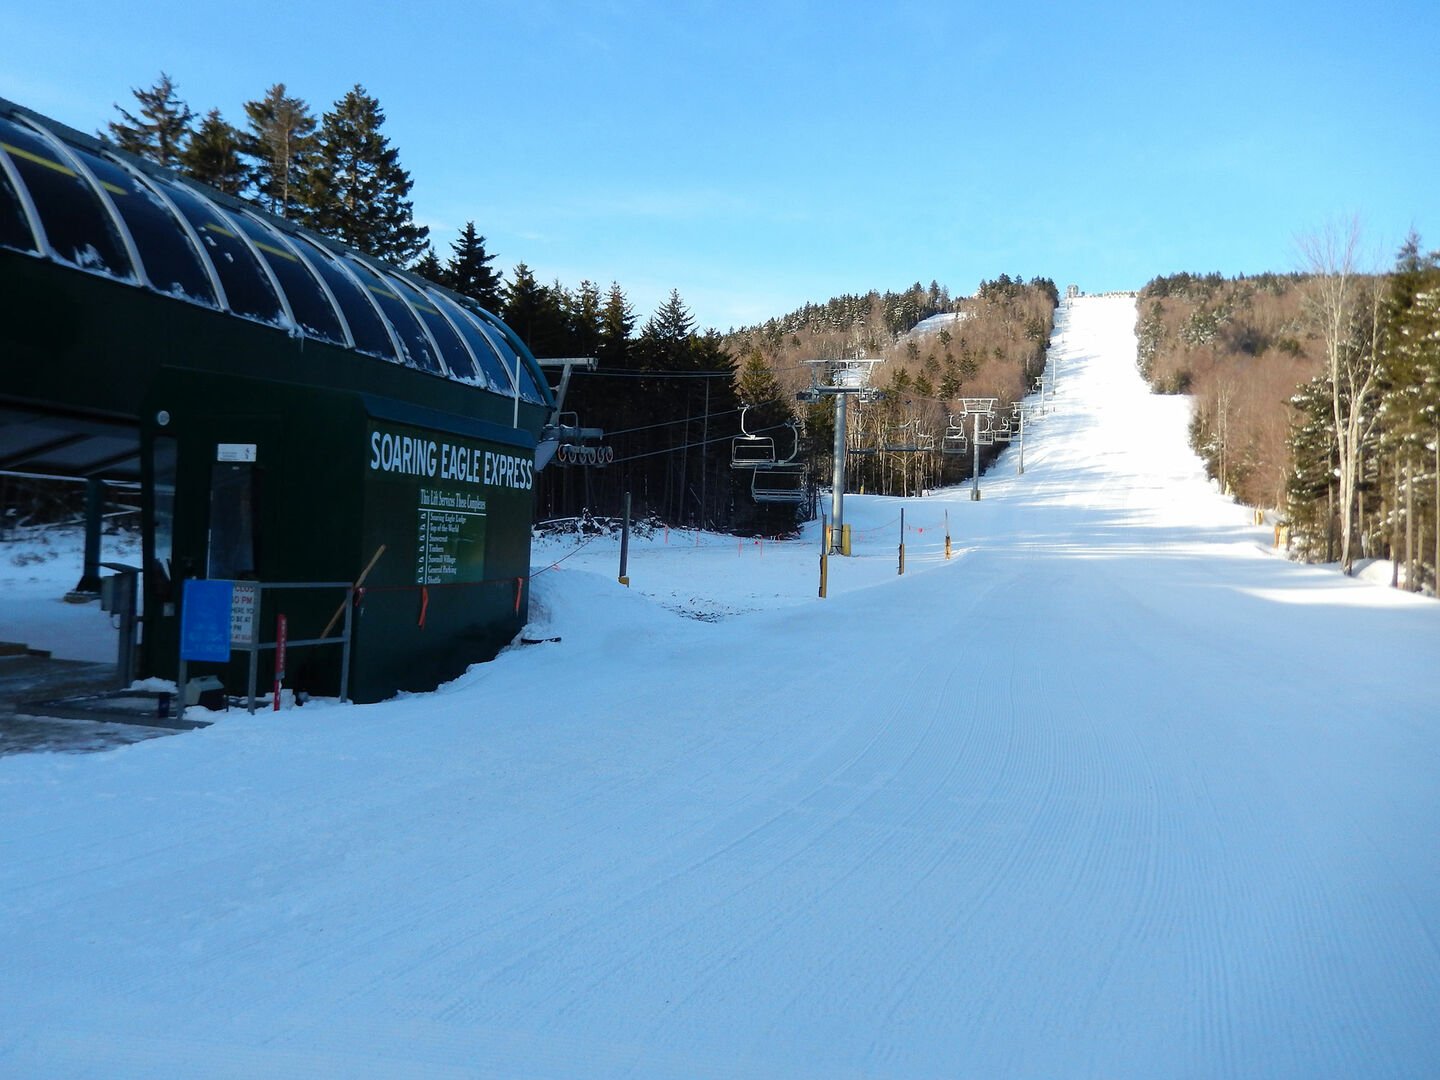 Ride up Soaring Eagle Lift, turn right at the top, ski about 200 yards and you're home at Loggers Run 8.